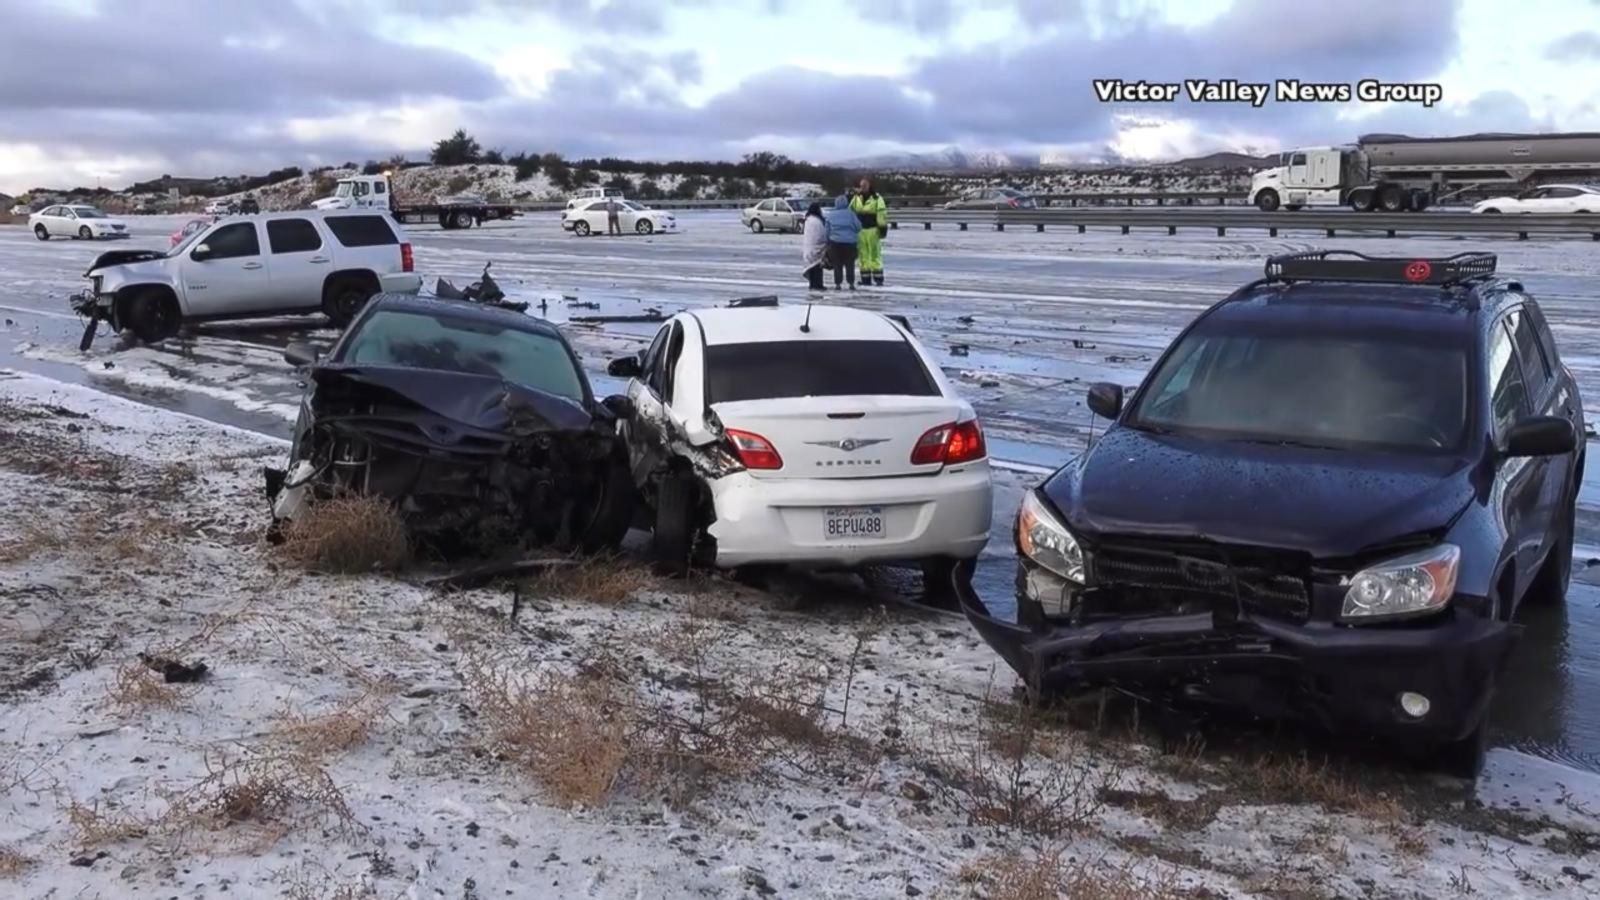 Storms charge across Plains, Midwest during busiest postChristmas